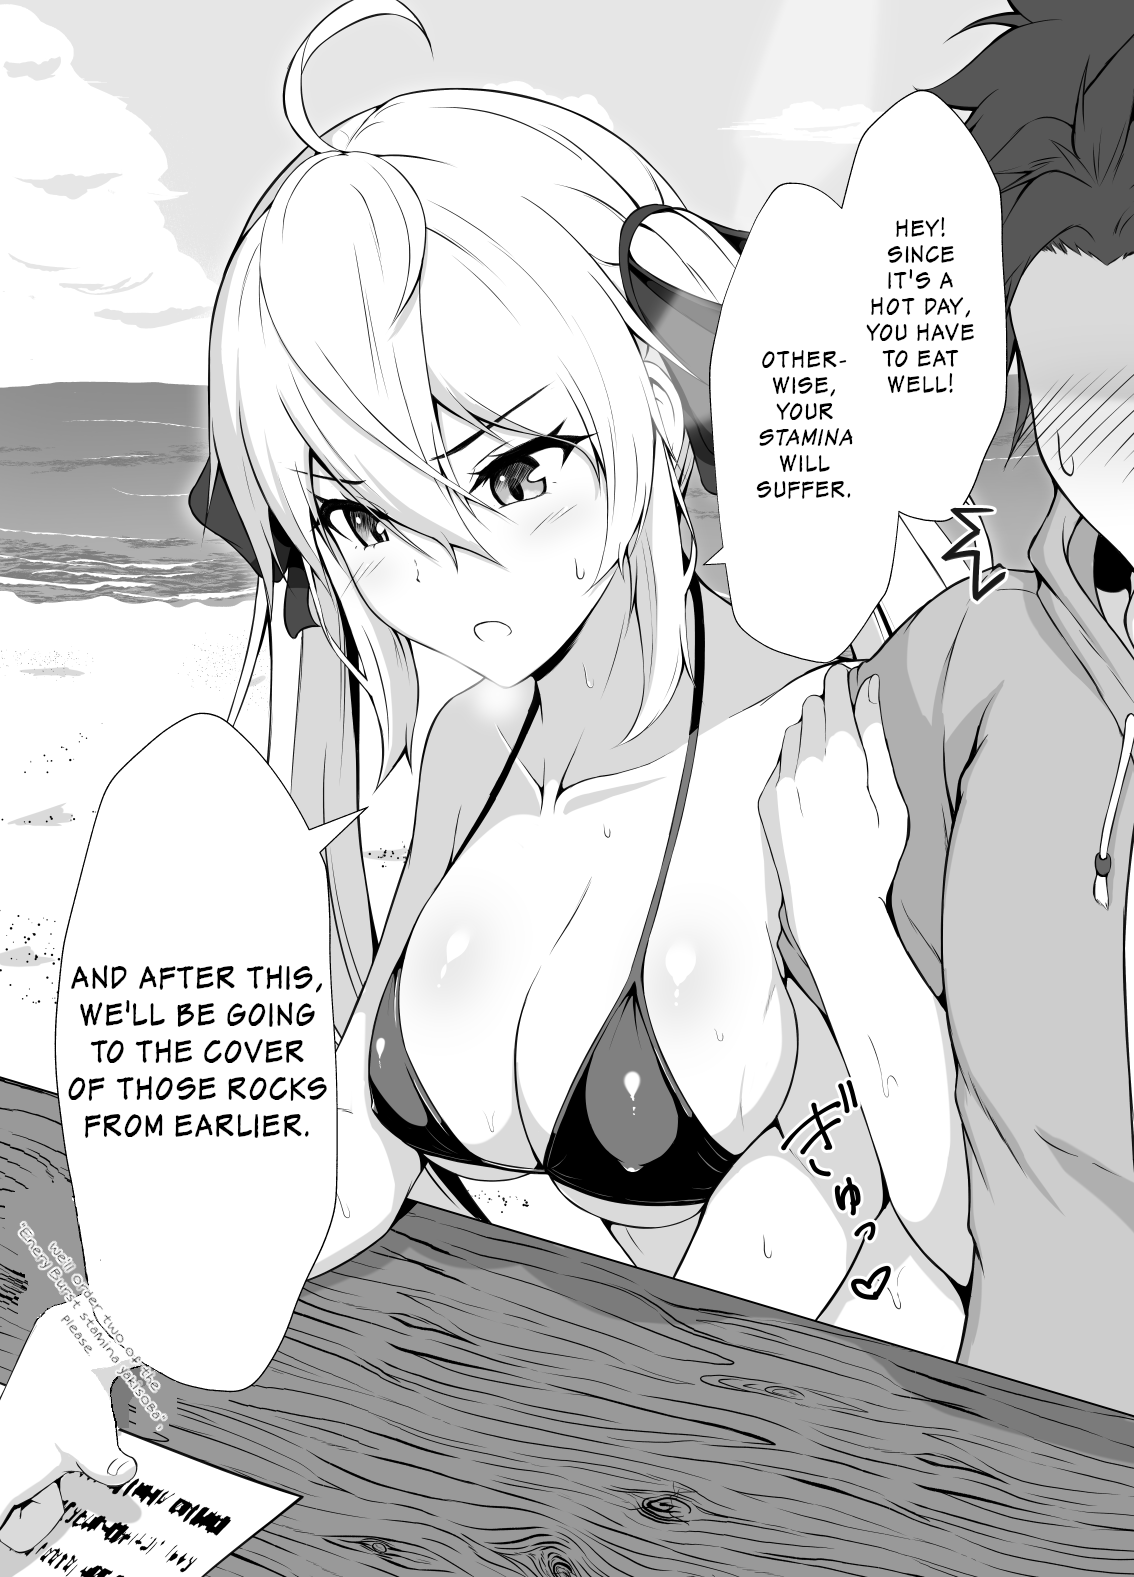 A Childhood Friend Who Only Appears Tsundere-Like On The Surface - Page 1